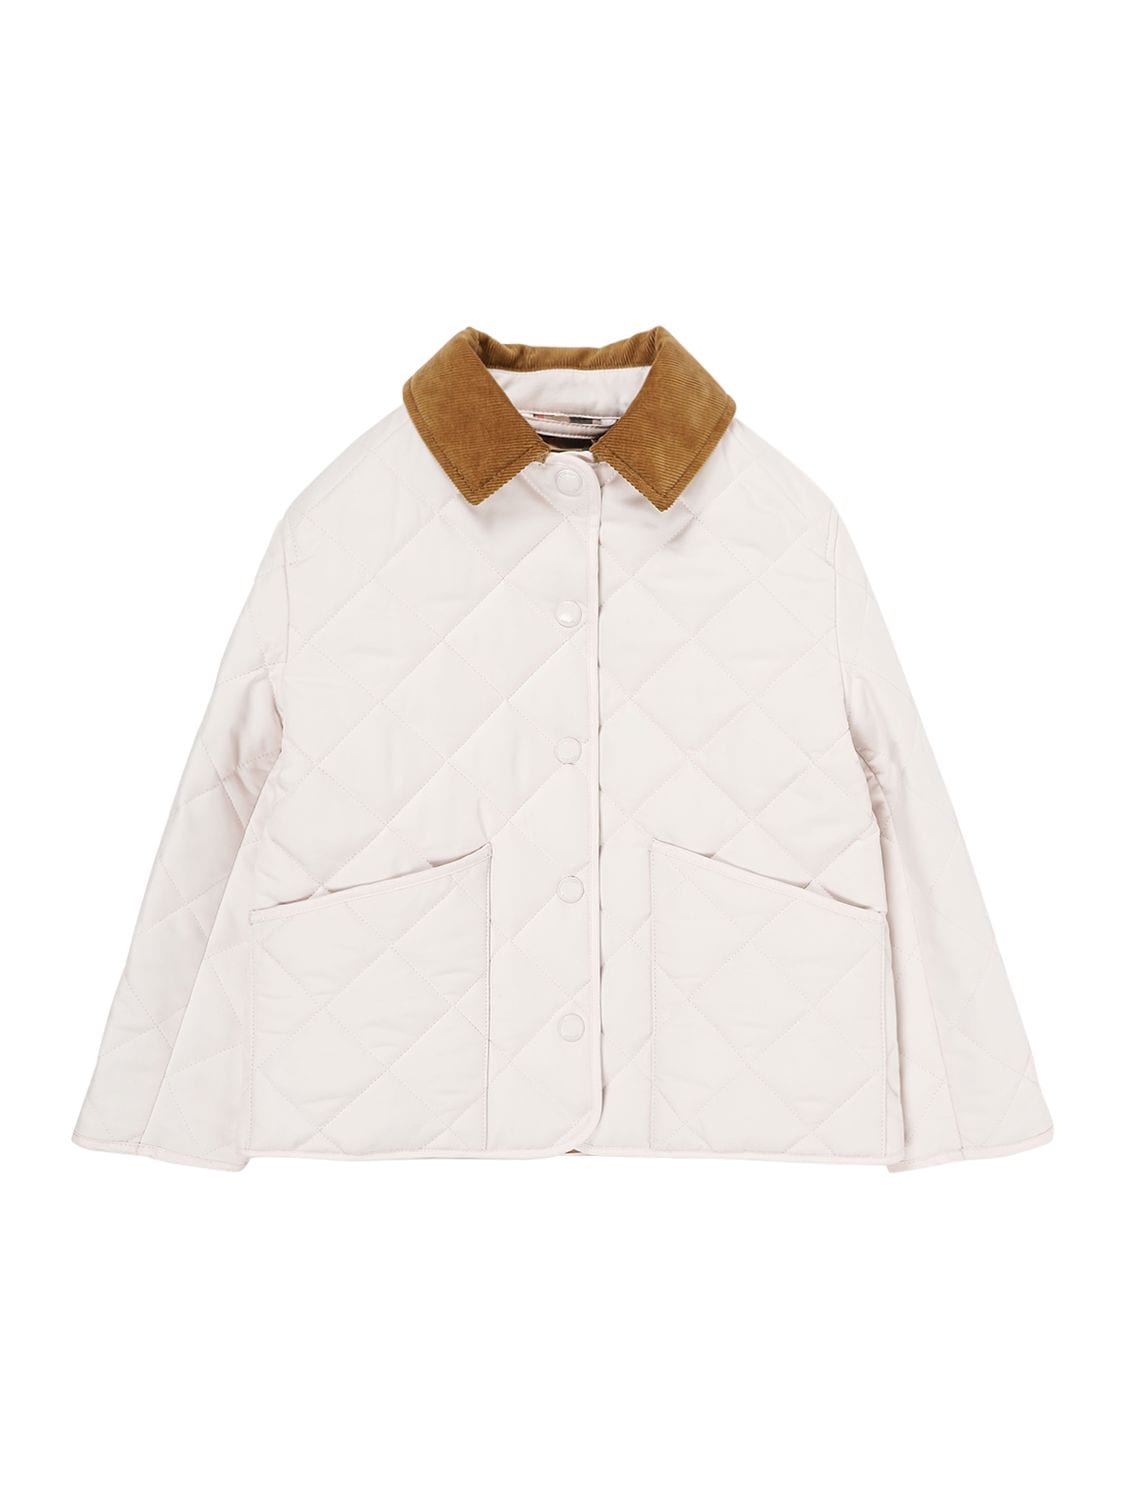 Burberry Kids' Quilted Jacket W/ Check Lining In Beige